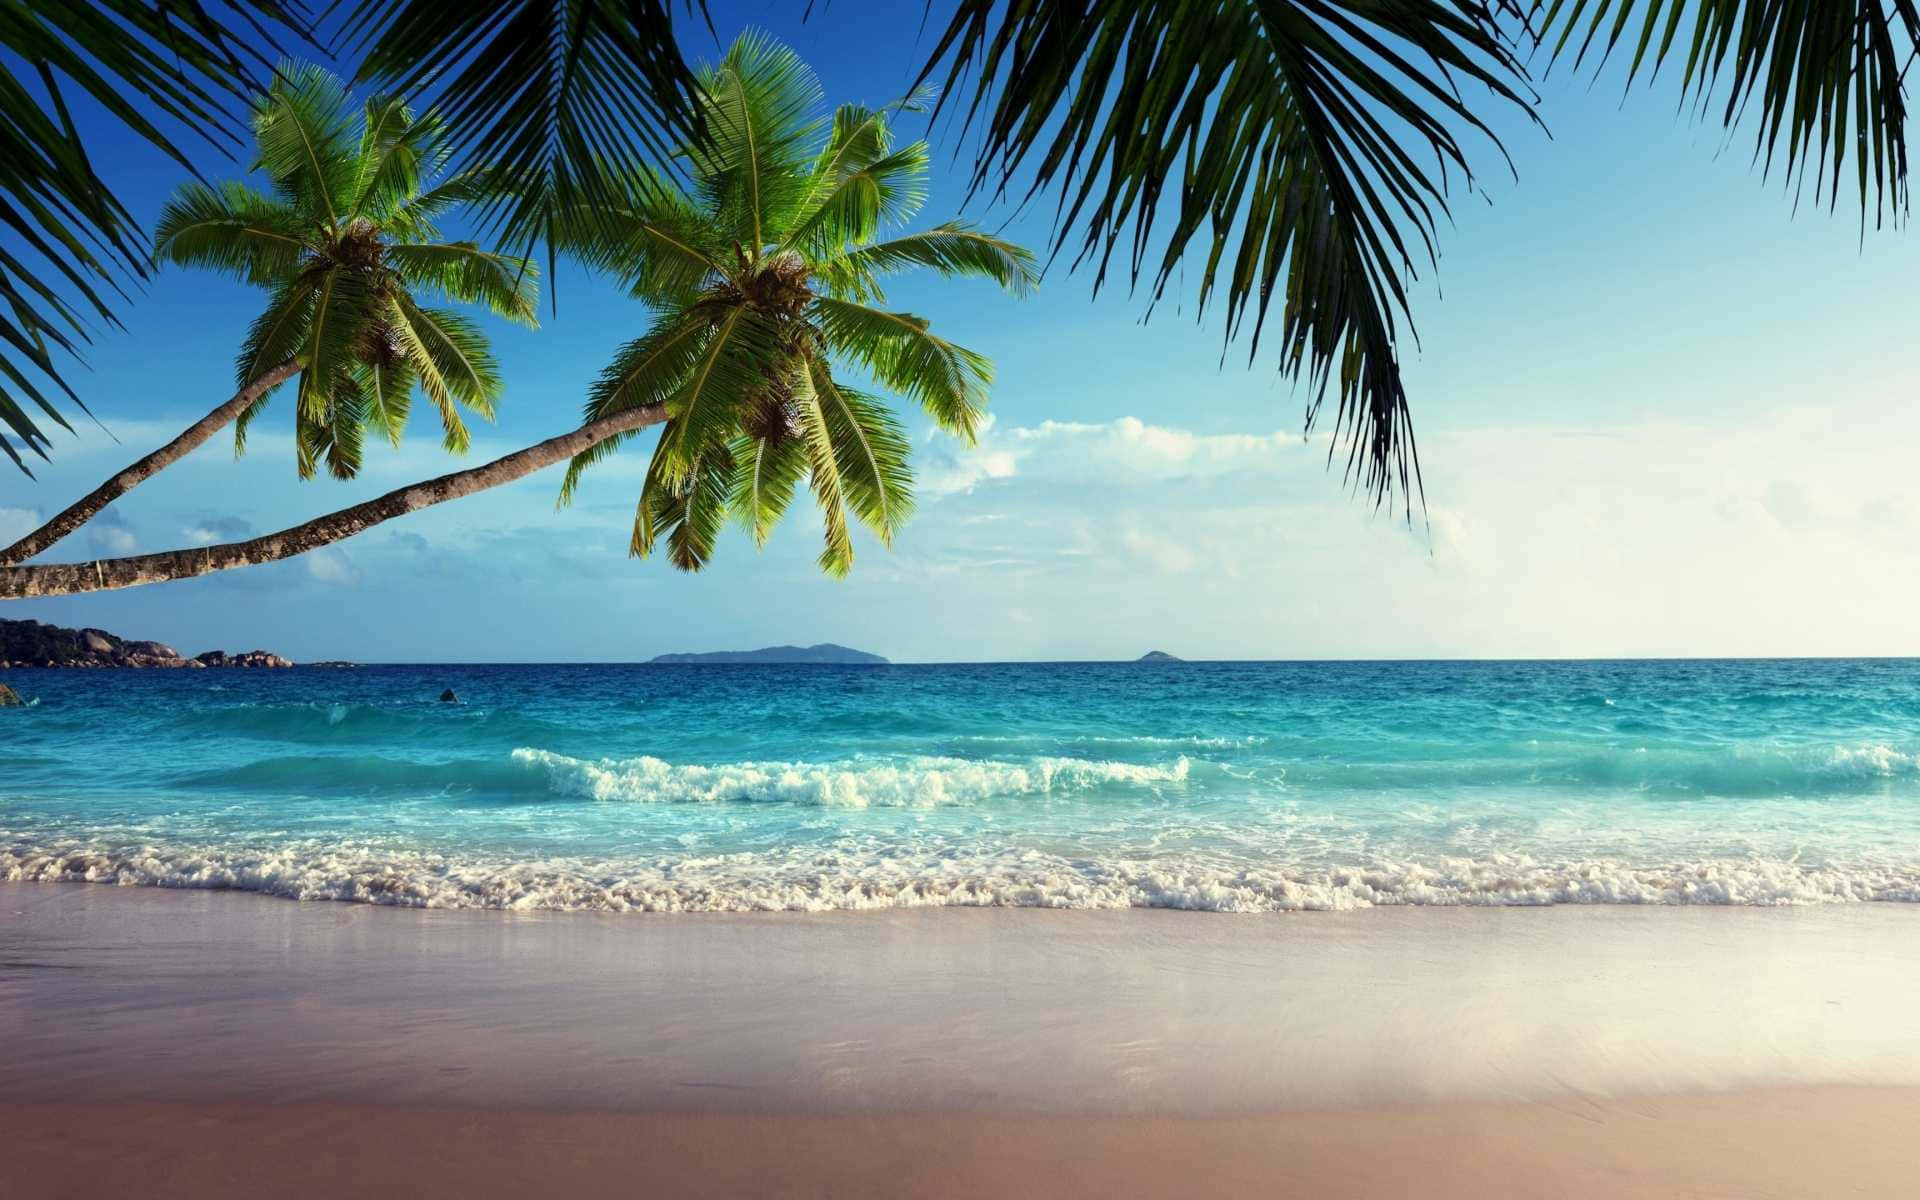 A picture-perfect tropical beach paradise Wallpaper